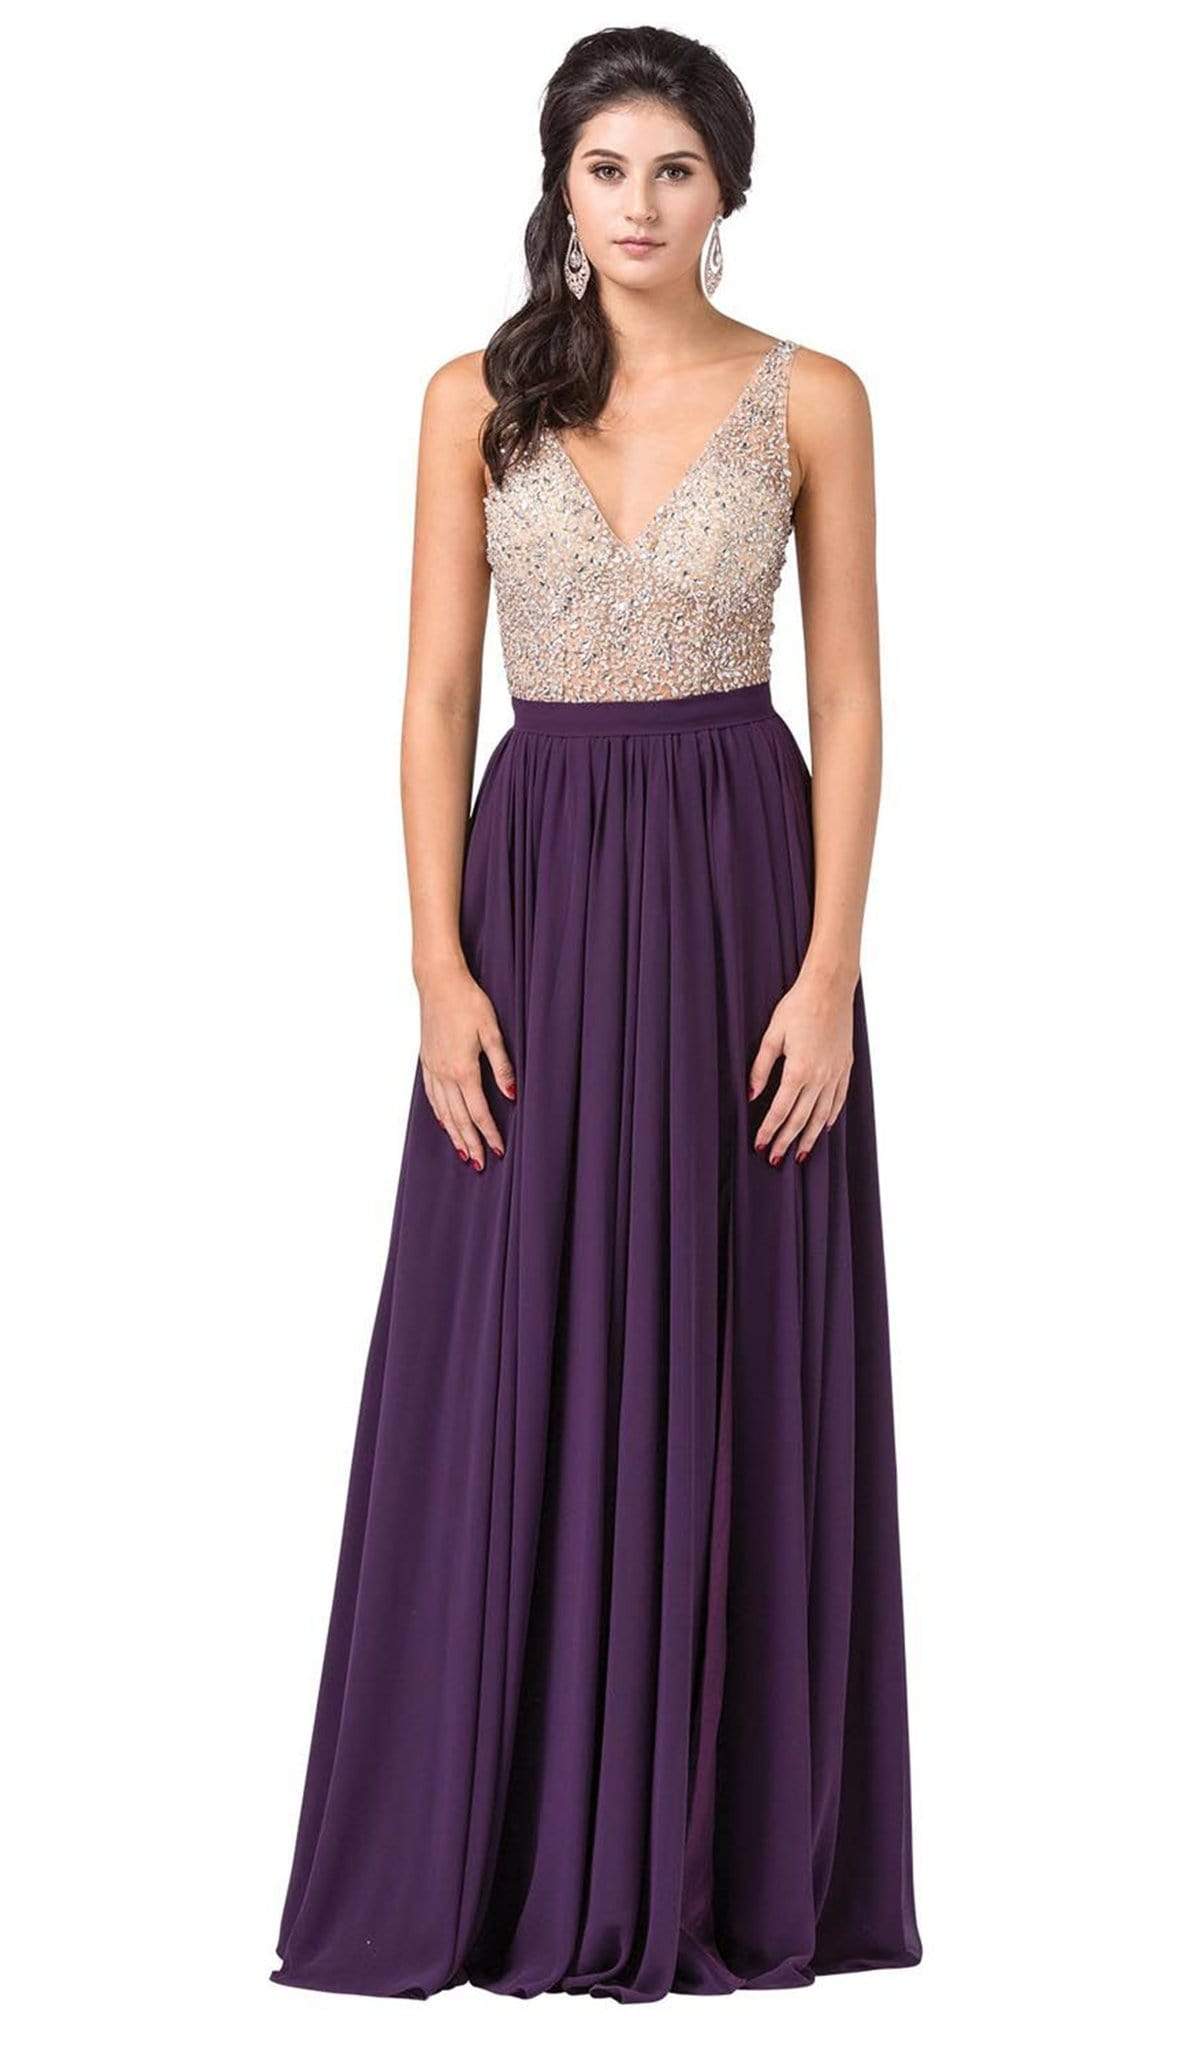 Dancing Queen - 2569 Illusion Beaded Bodice Flowy Prom Dress
